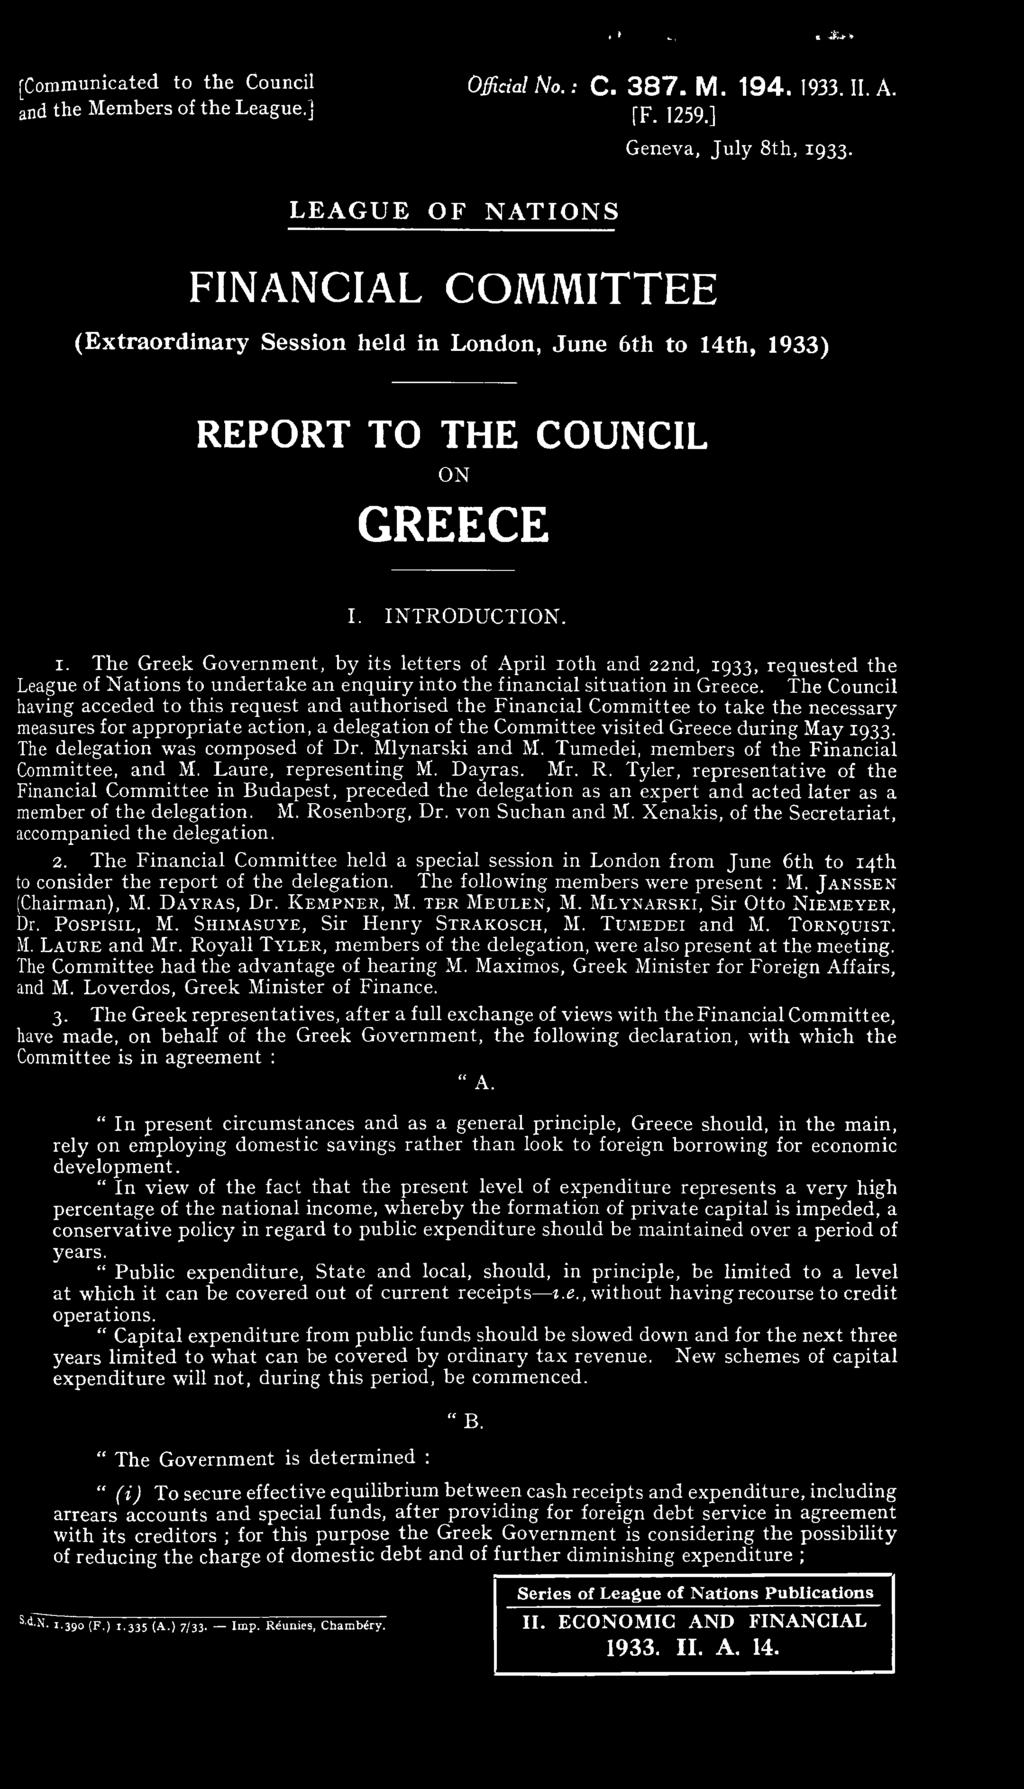 th, 1933) REPORT TO THE COUNCIL ON GREECE I. INTRODUCTION. 1. The Greek Government, by its letters of April 10th and 22nd, 1933, requested the League of N ations to undertake an enquiry into the financial situation in Greece.